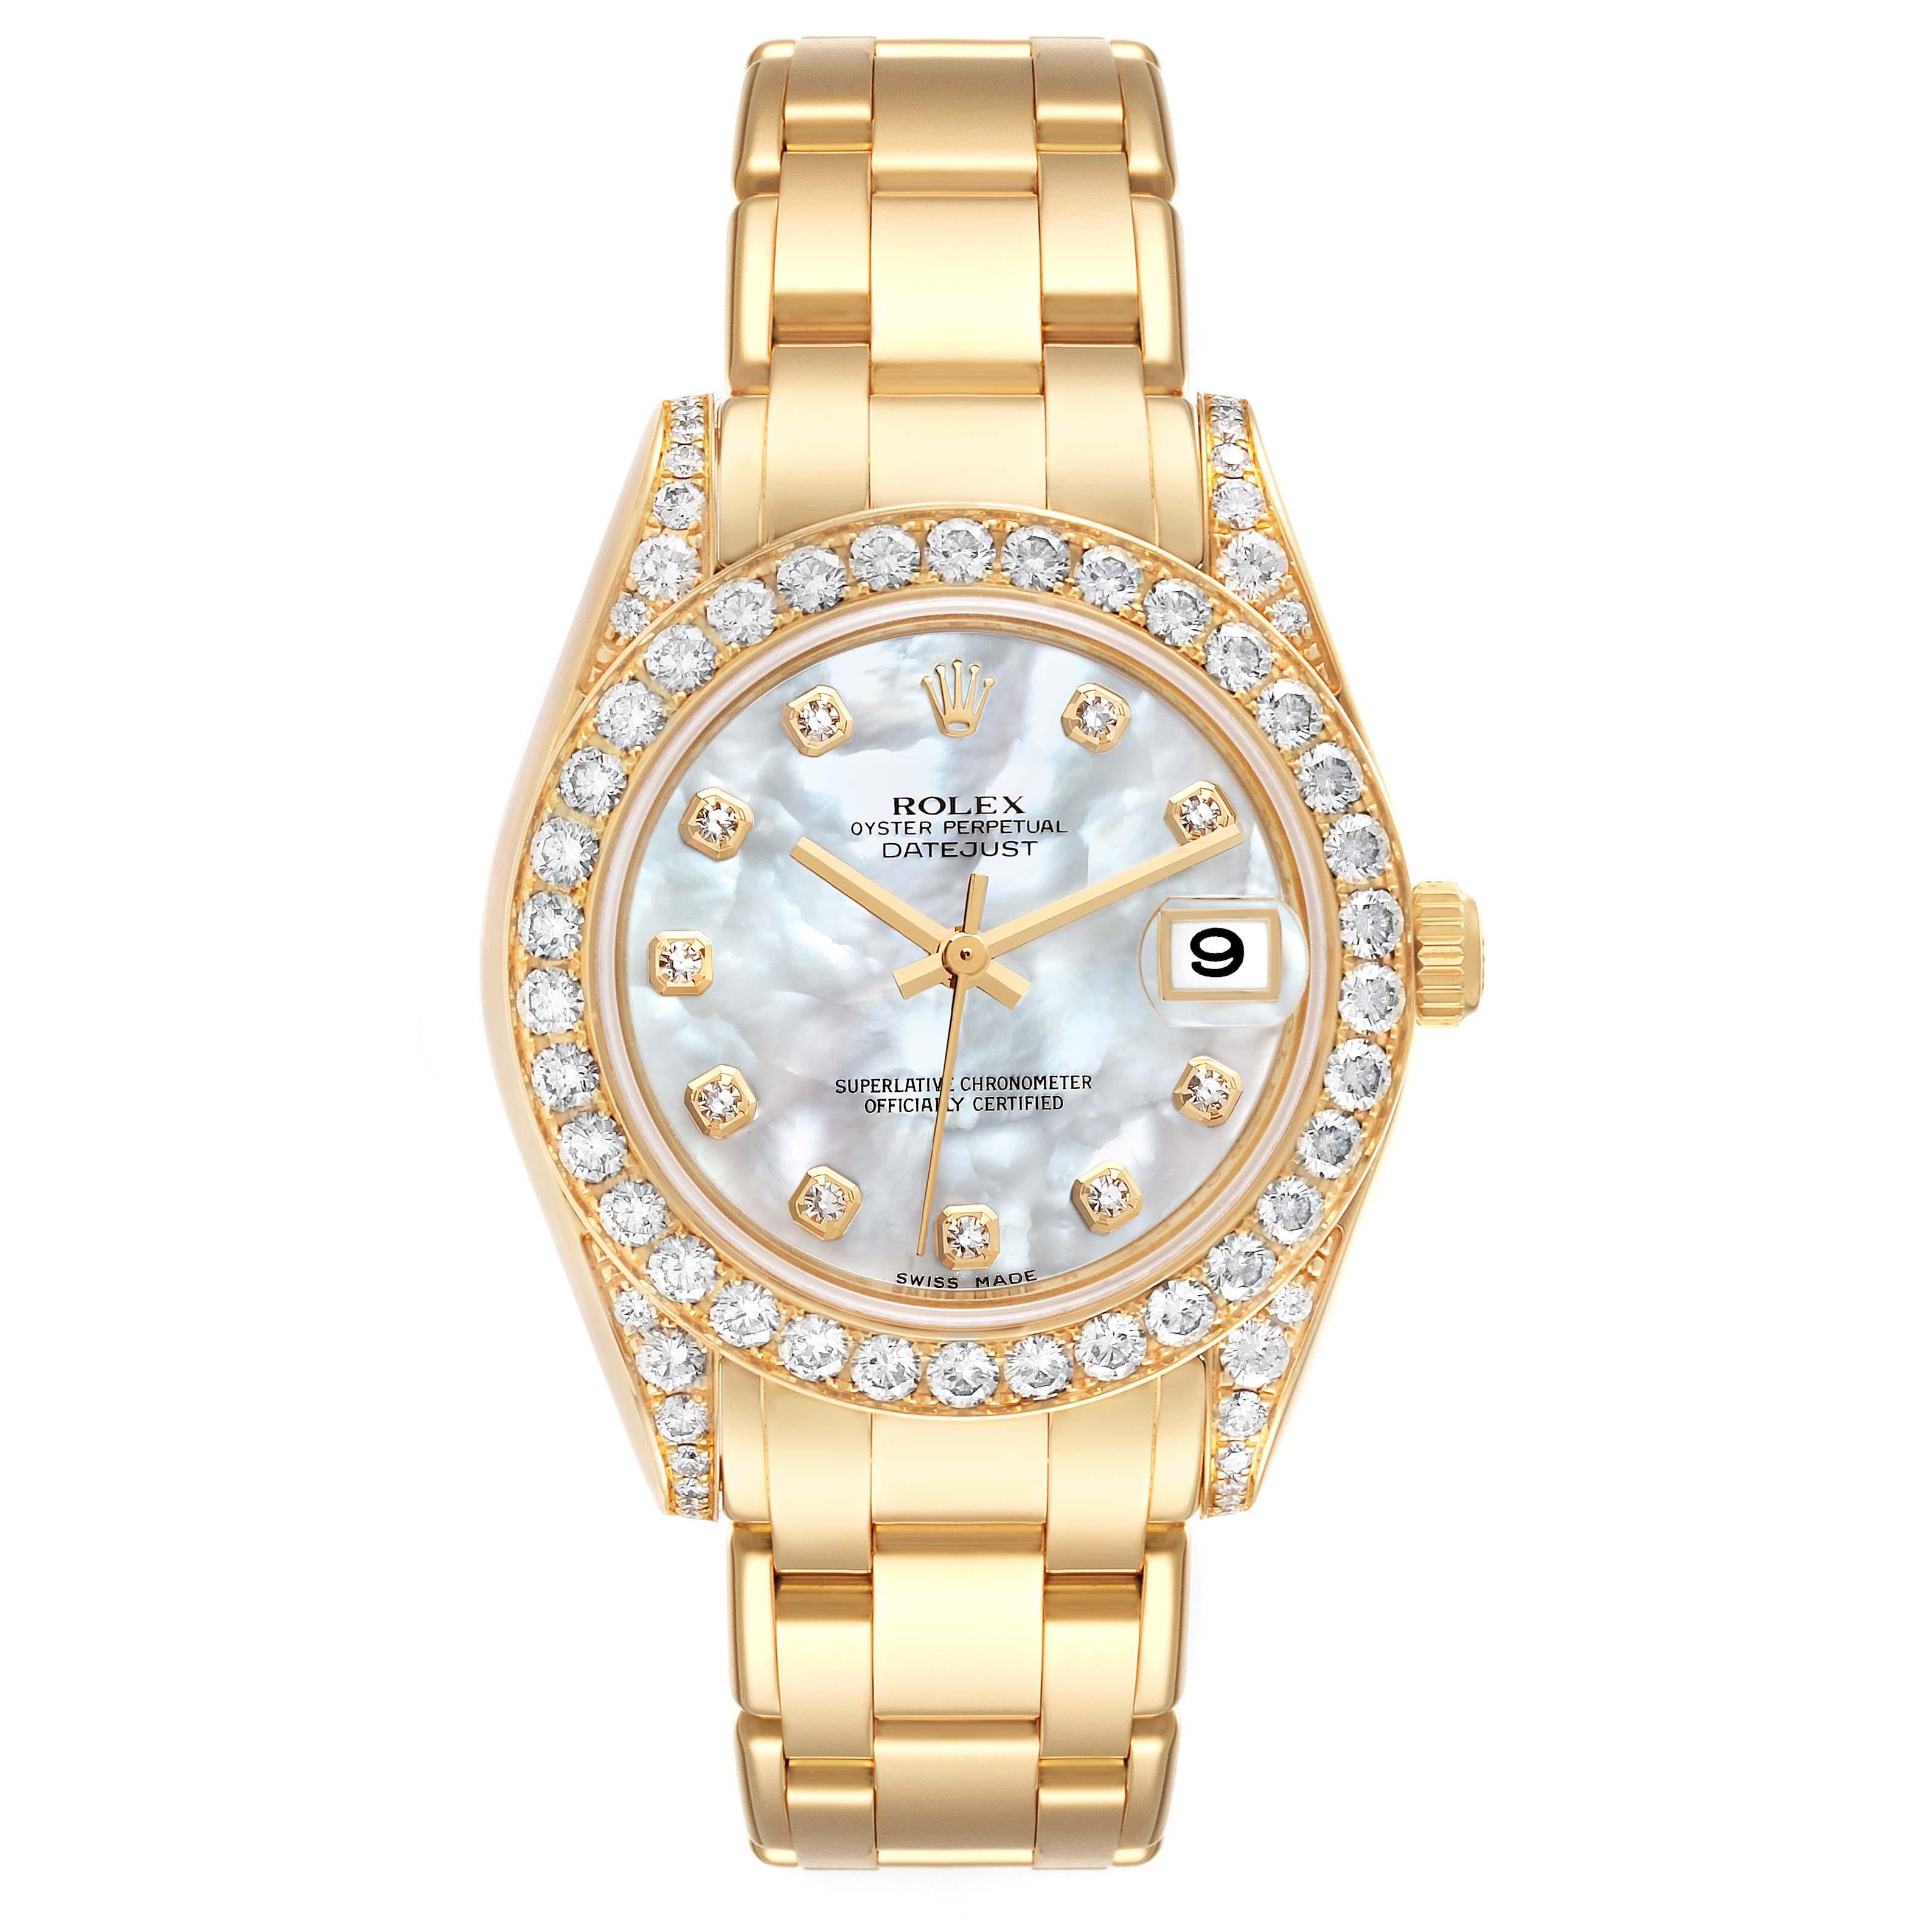 Rolex Pearlmaster 34mm Yellow Gold MOP Diamond Ladies Watch 81158 Box Card. Officially certified chronometer automatic self-winding movement with quickset date function. 18k yellow gold oyster case 34.0 mm in diameter. Rolex logo on a crown.